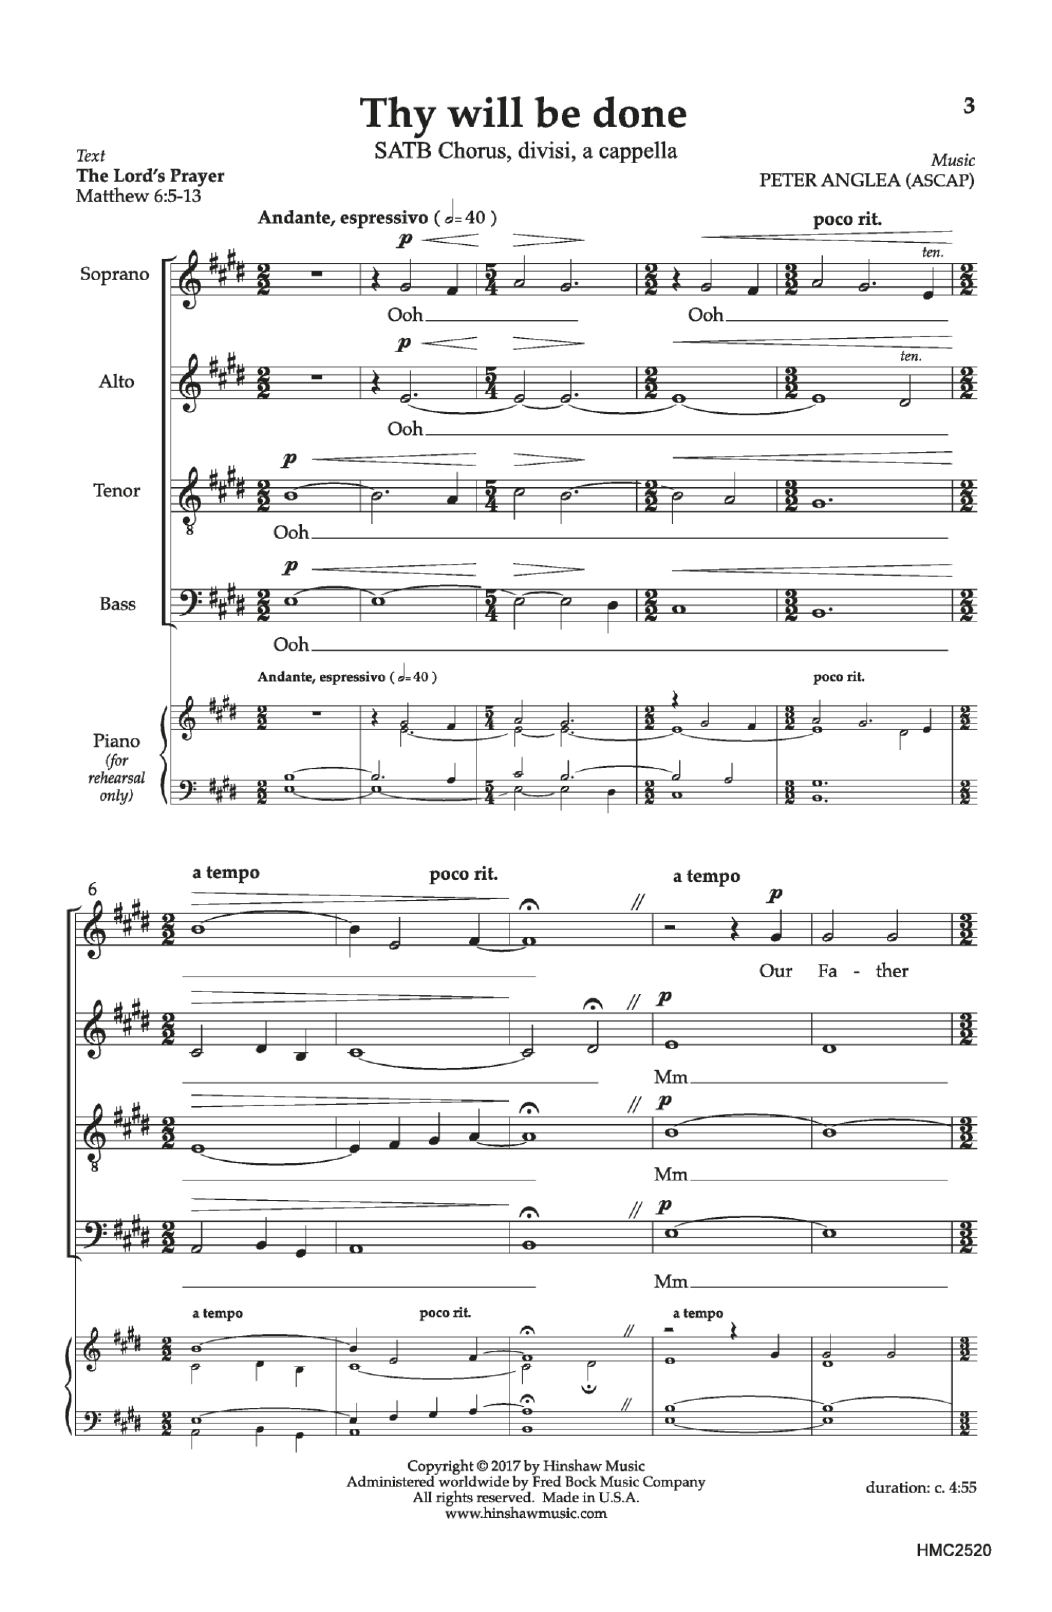 Download Peter Anglea Thy Will Be Done Sheet Music